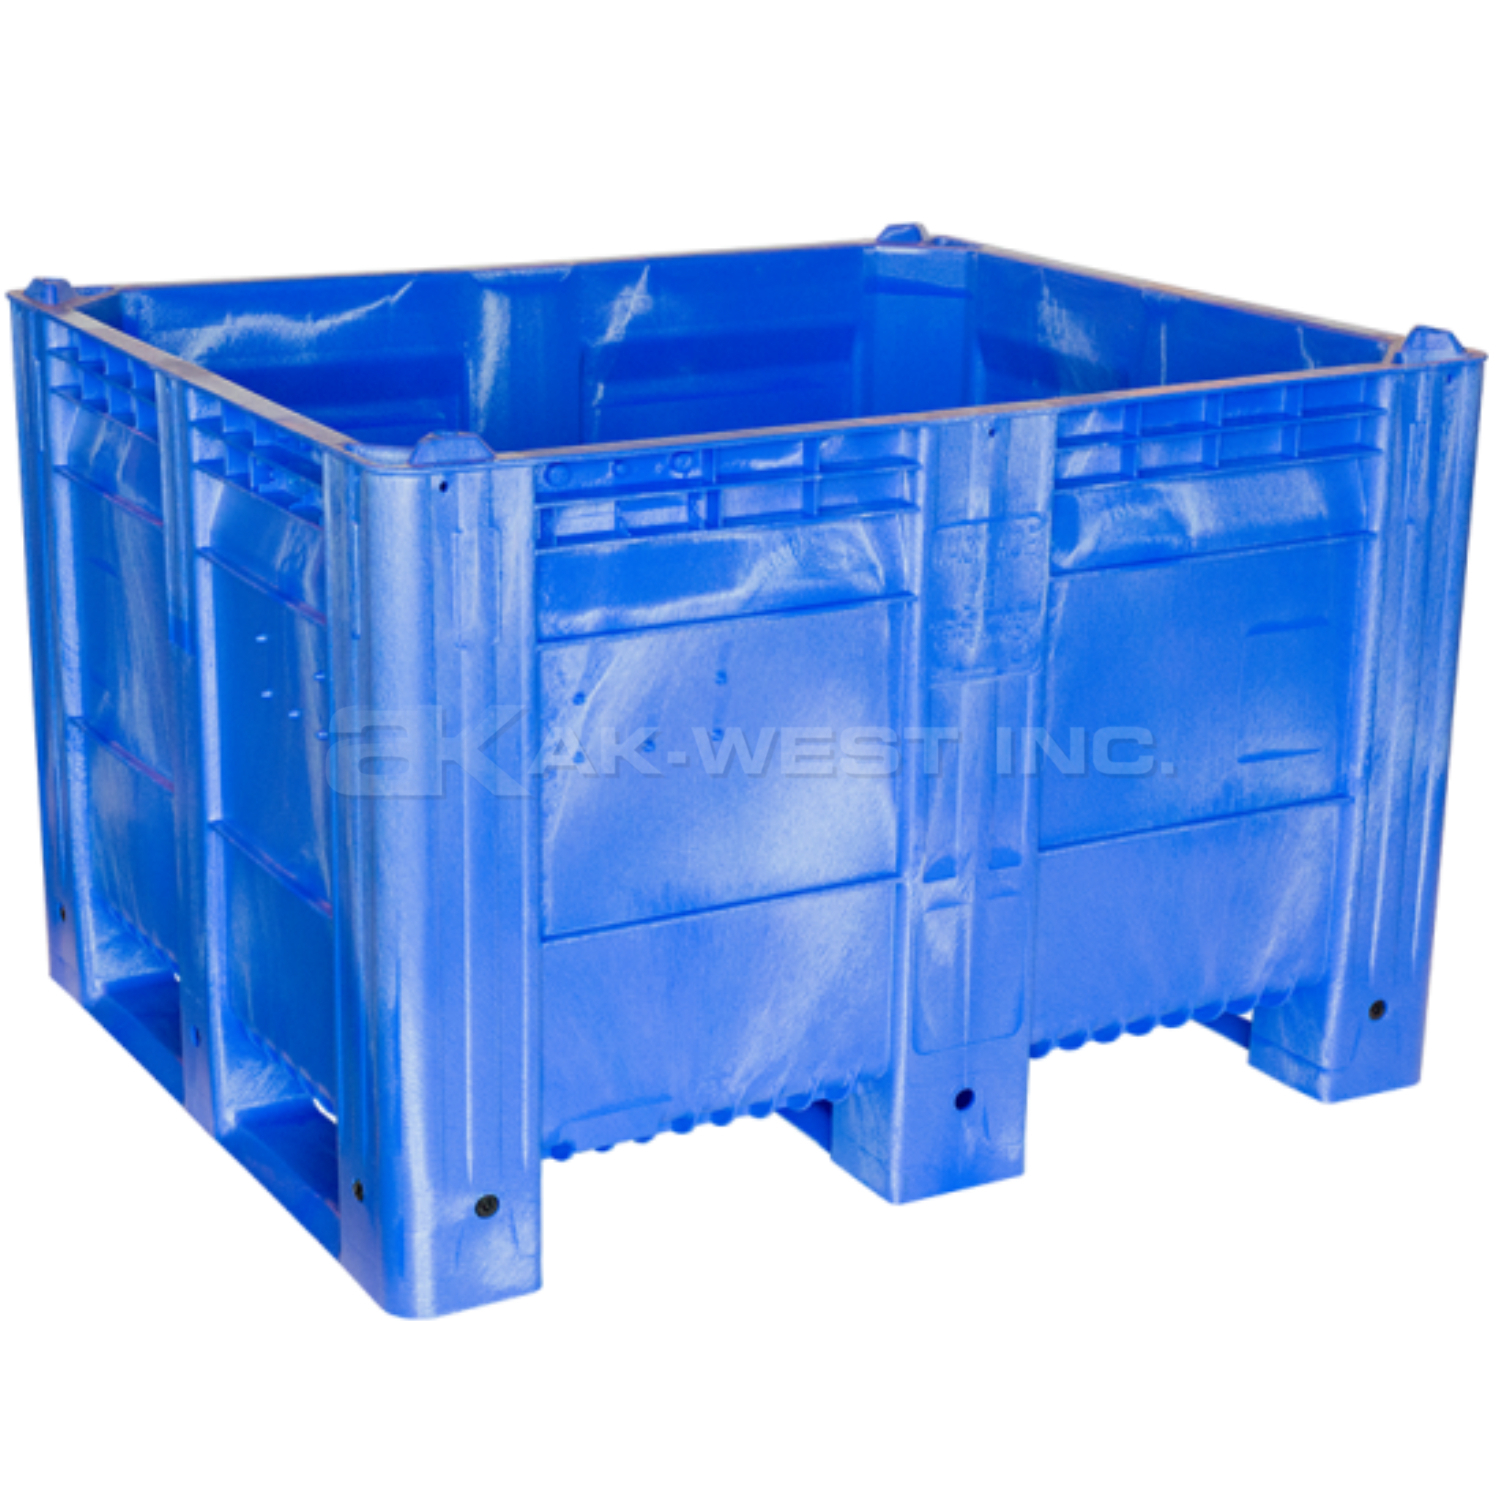 Blue, 48"L x 40"W x 31"H Bulk Container w/ Solid Sides, Short Side Runners